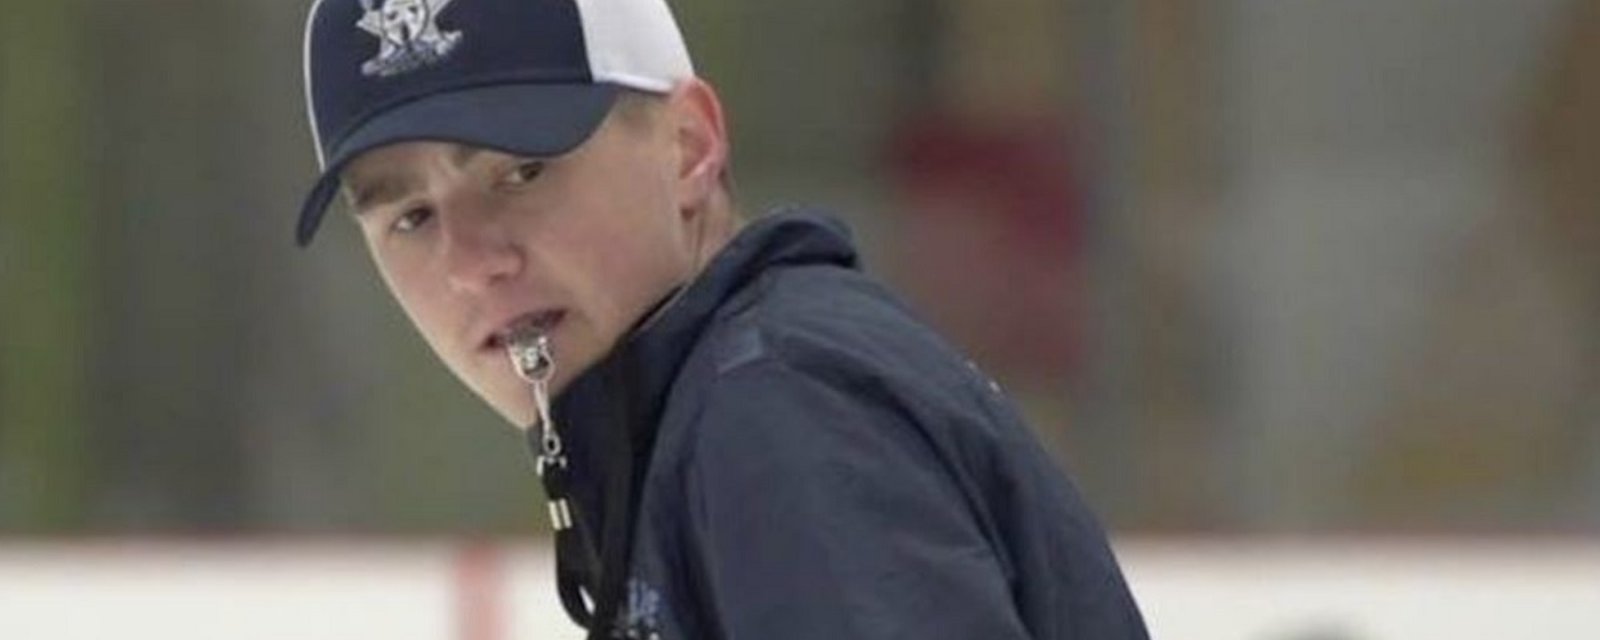 Breaking: Hockey coach arrested on charges of suspected child abuse. 